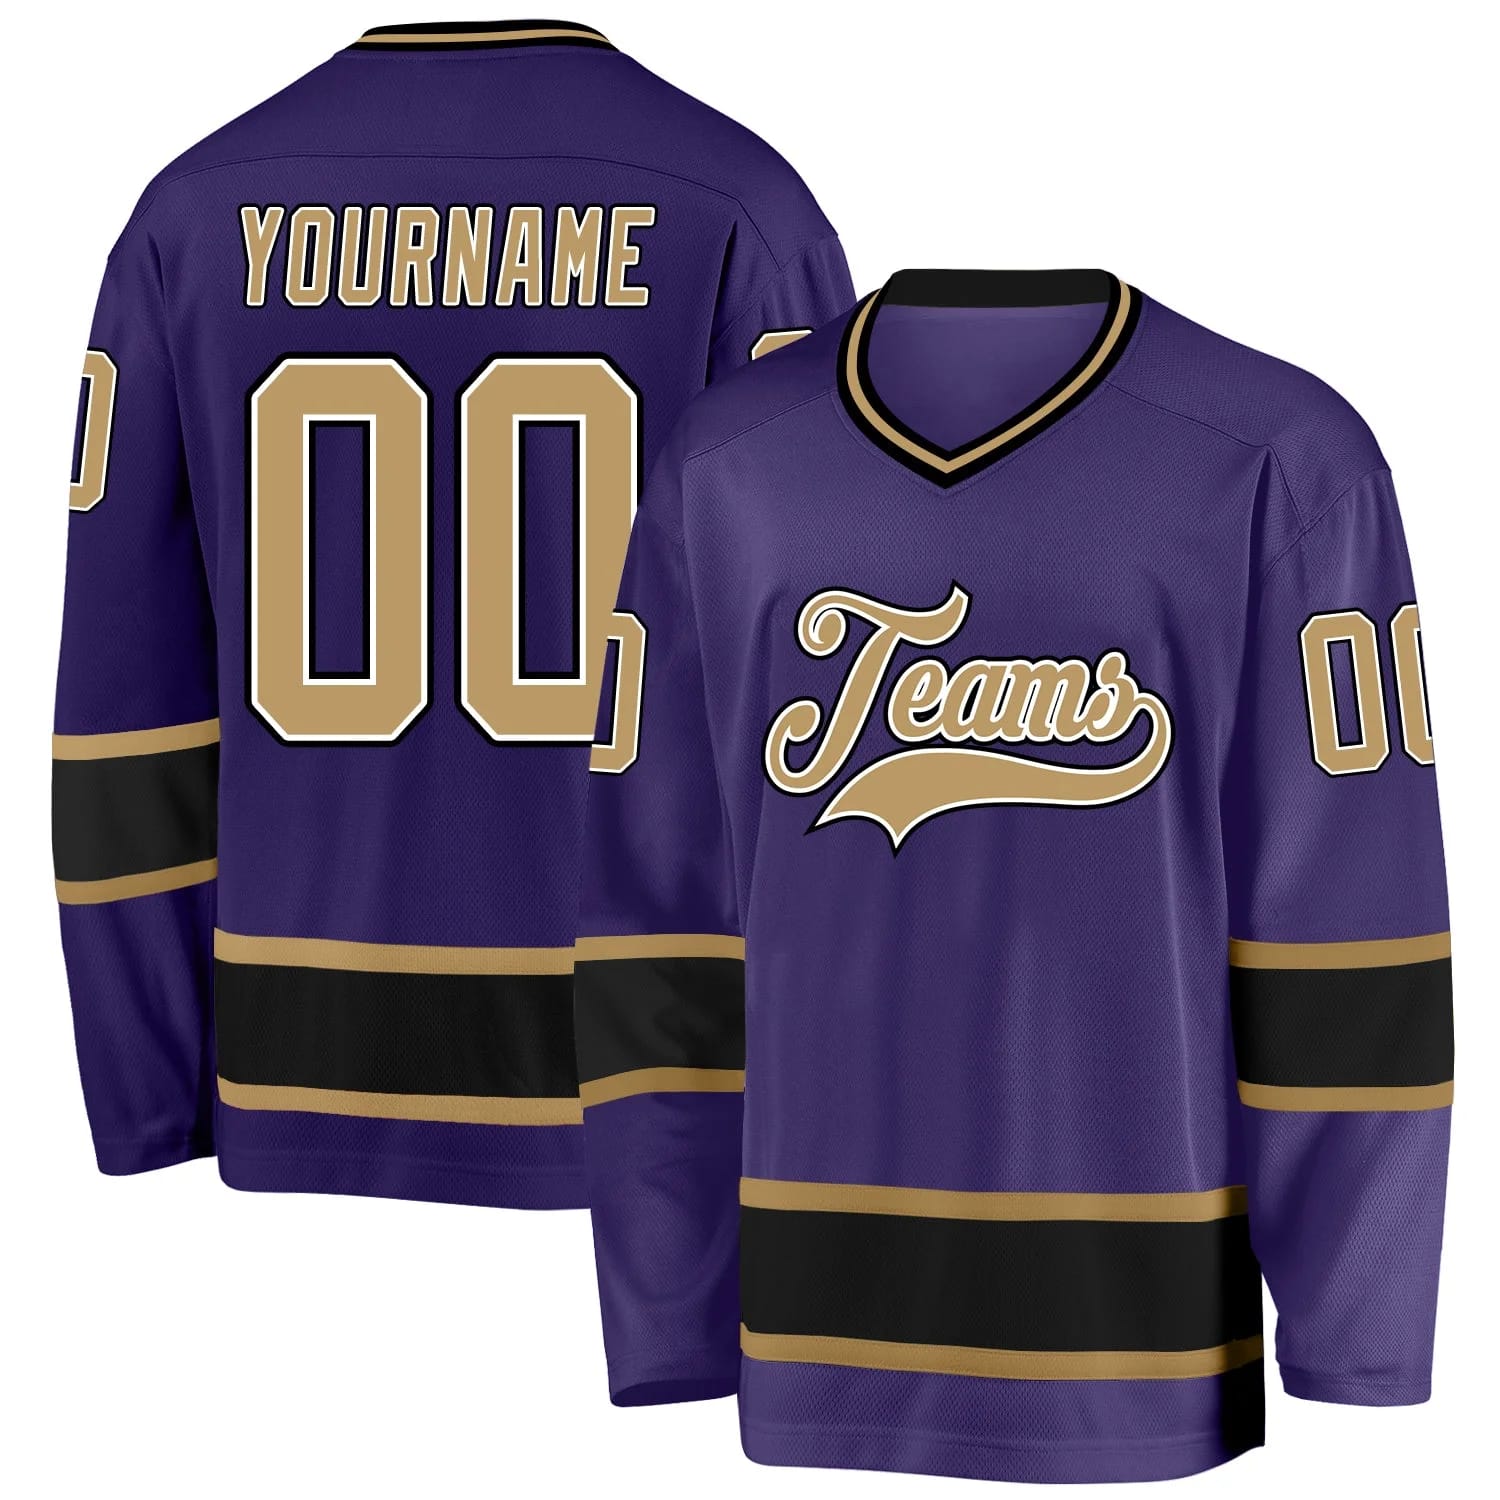 Stitched And Print Purple Old Gold-Black Hockey Jersey Custom